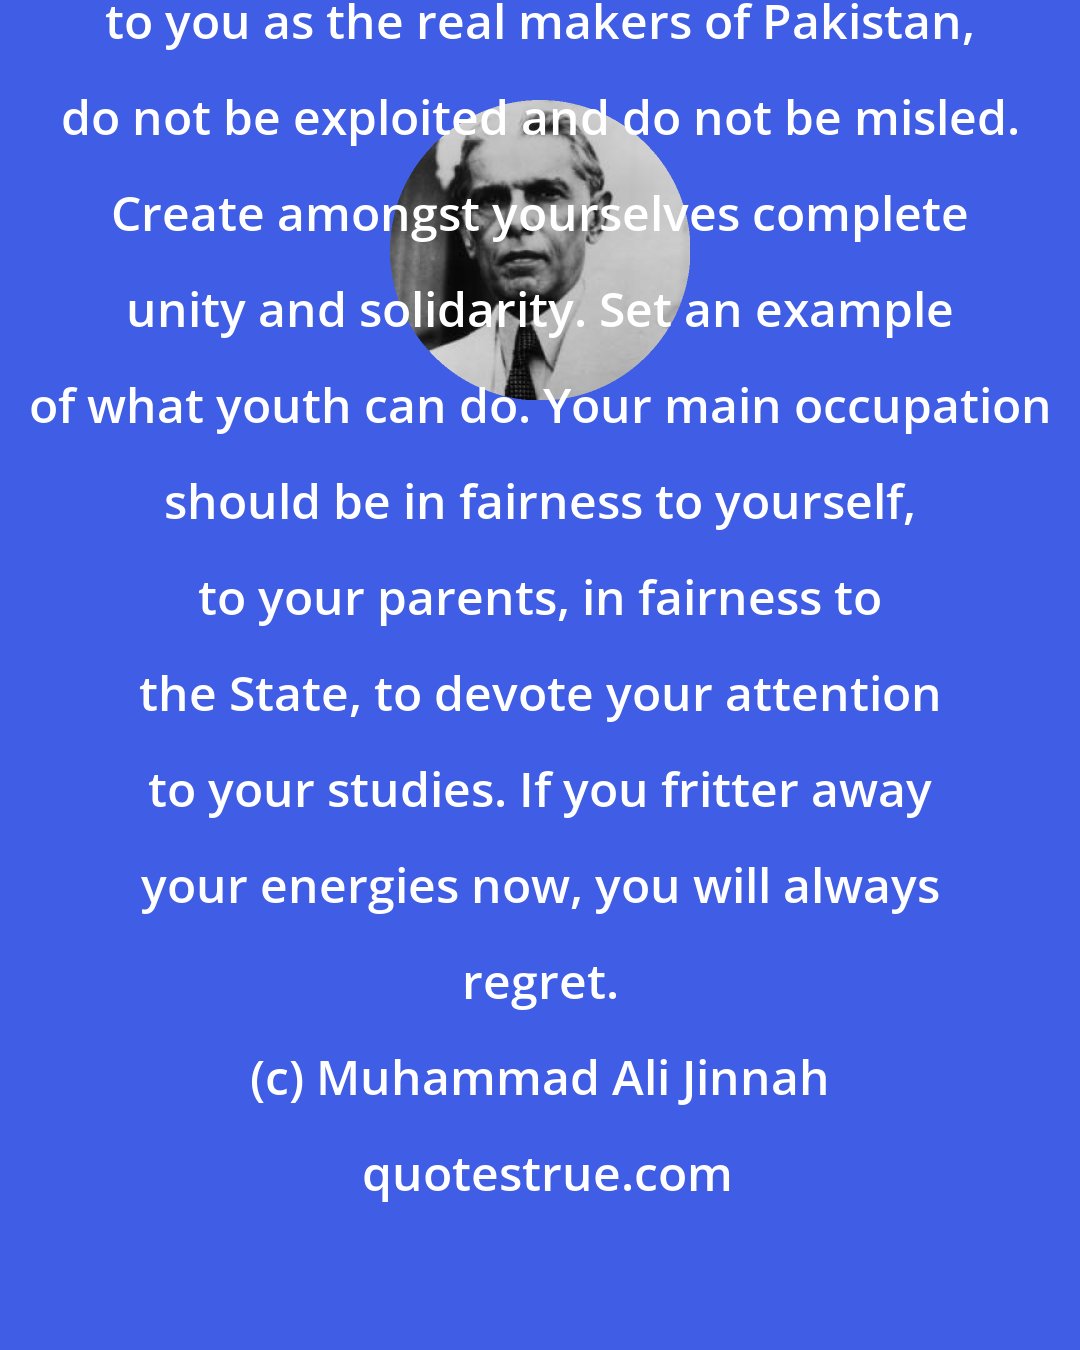 Muhammad Ali Jinnah: My young friends, I look forward to you as the real makers of Pakistan, do not be exploited and do not be misled. Create amongst yourselves complete unity and solidarity. Set an example of what youth can do. Your main occupation should be in fairness to yourself, to your parents, in fairness to the State, to devote your attention to your studies. If you fritter away your energies now, you will always regret.